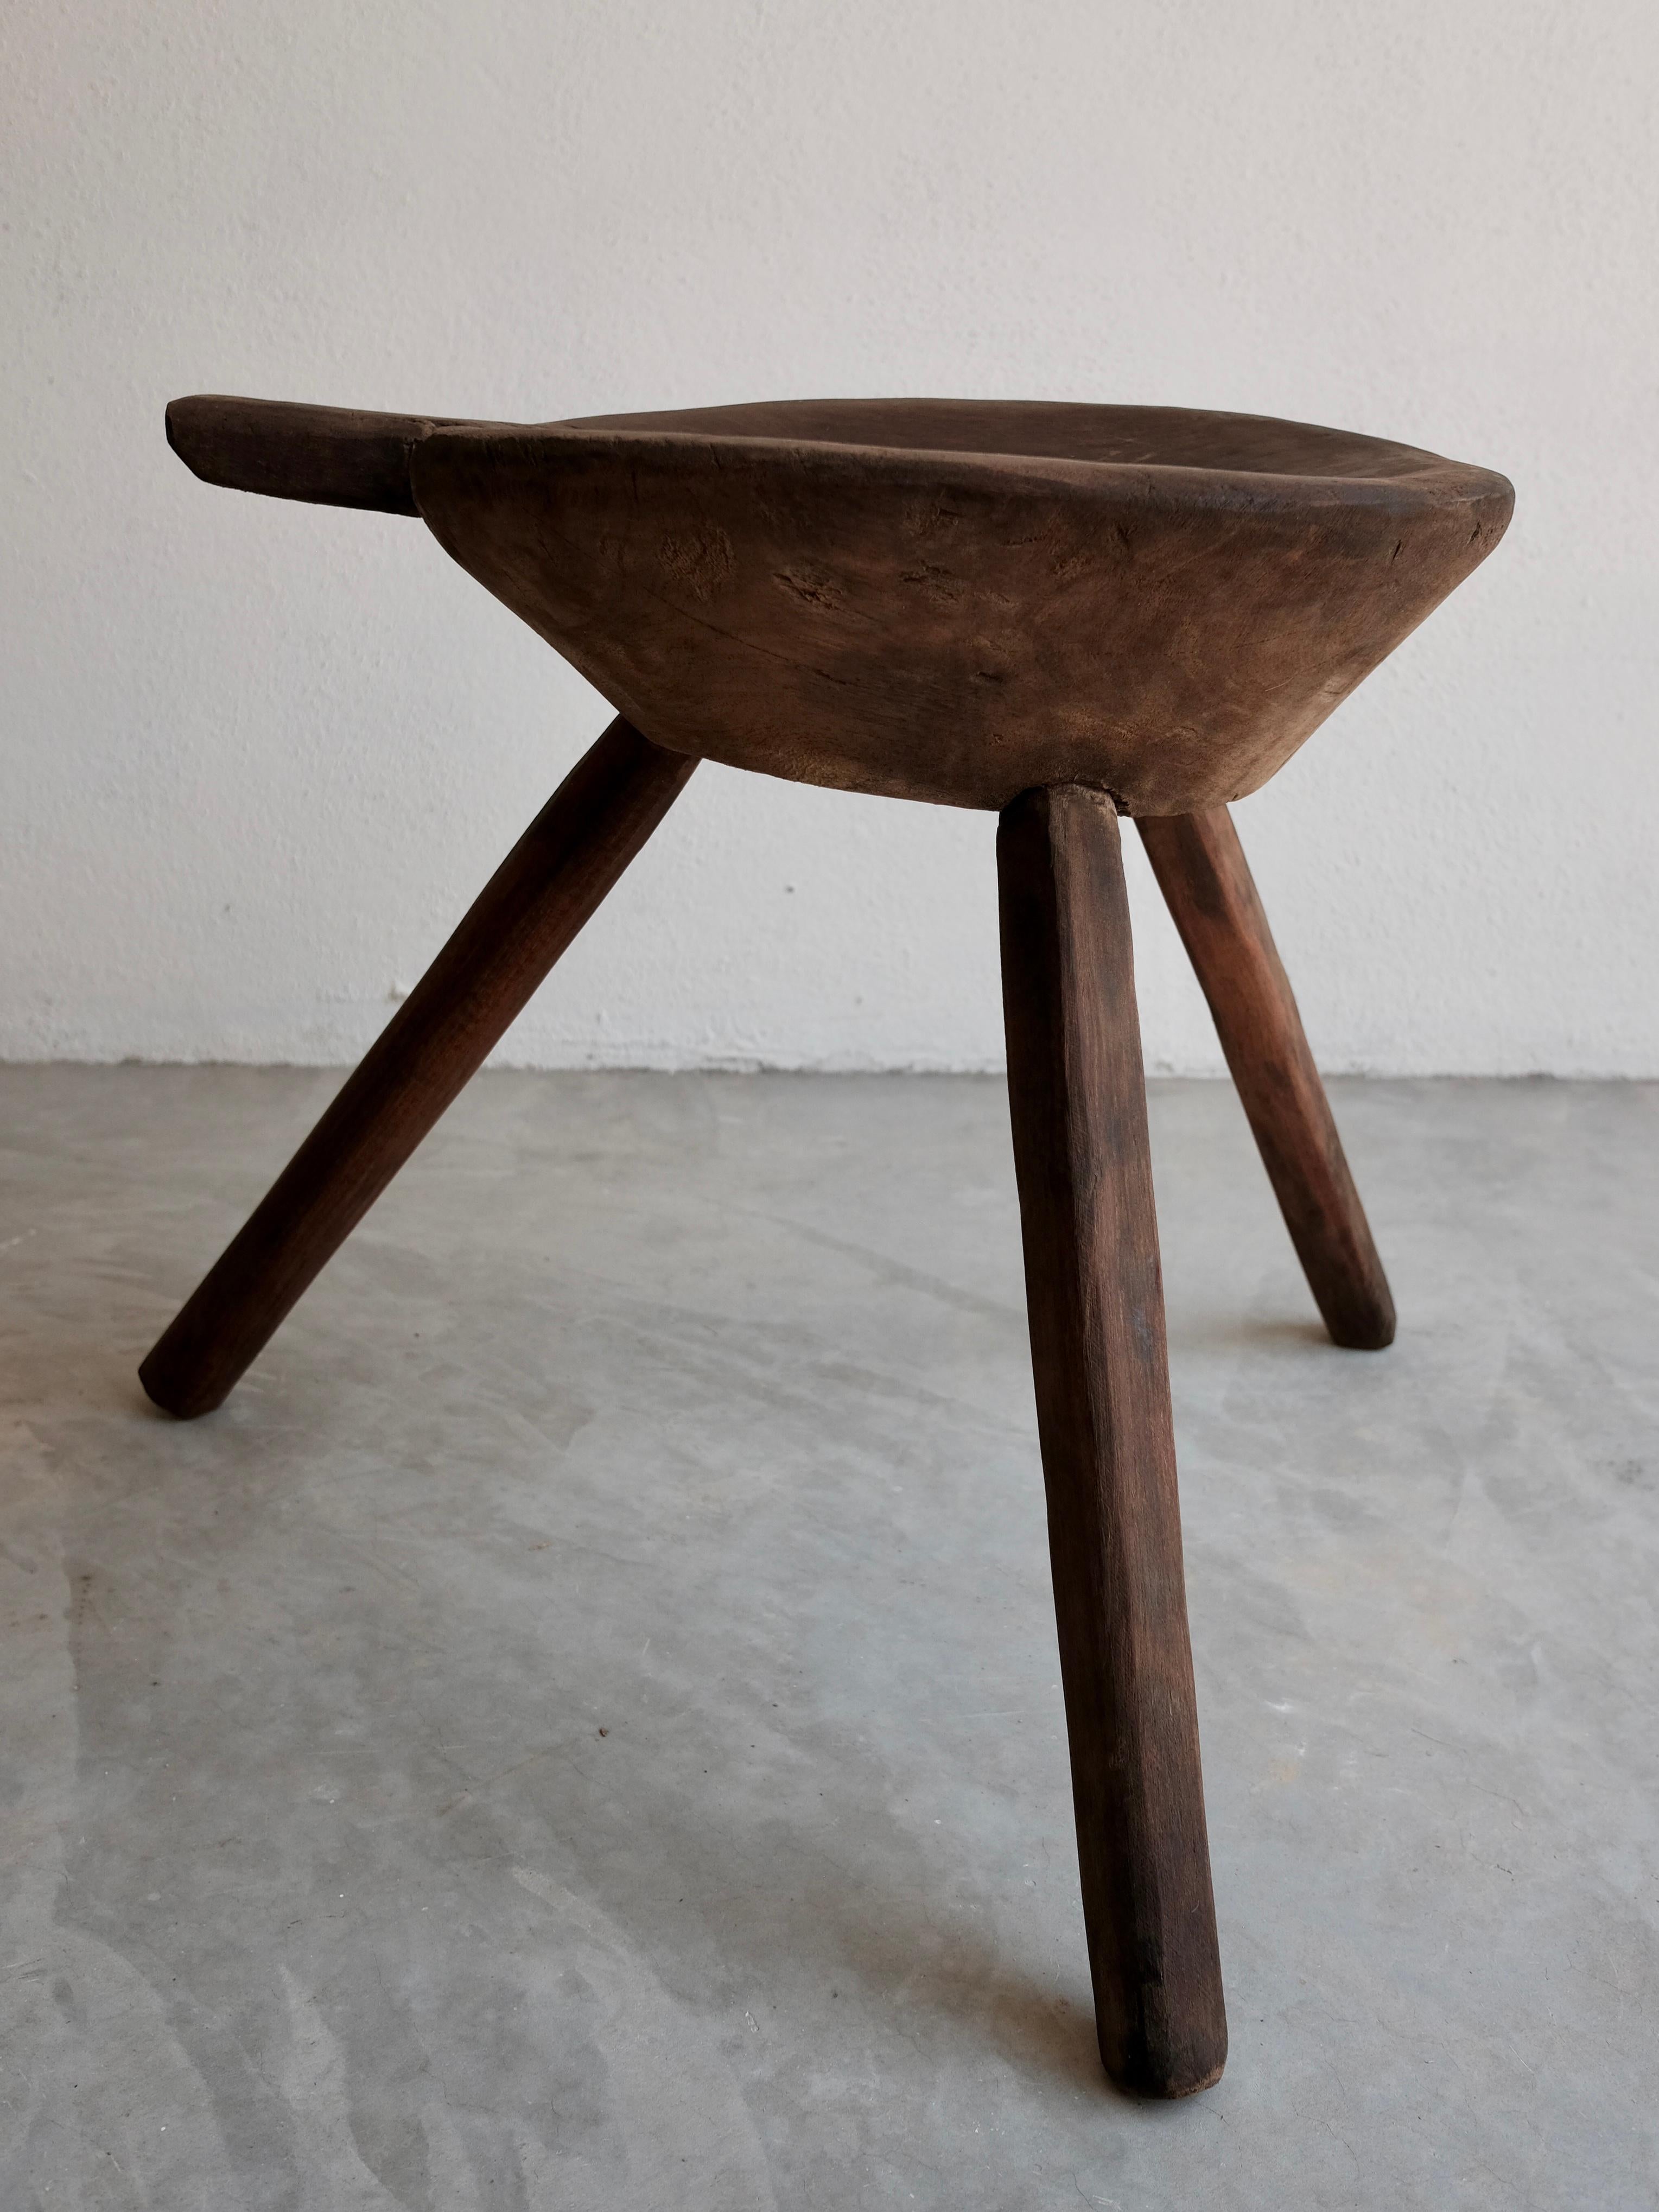 Mesquite work stool from Villa de Zaragoza, San Luis Potosi, Mexico. Dark appearance is due to the exposure of the wood burning stove nearby. Unusually large stool for the region.